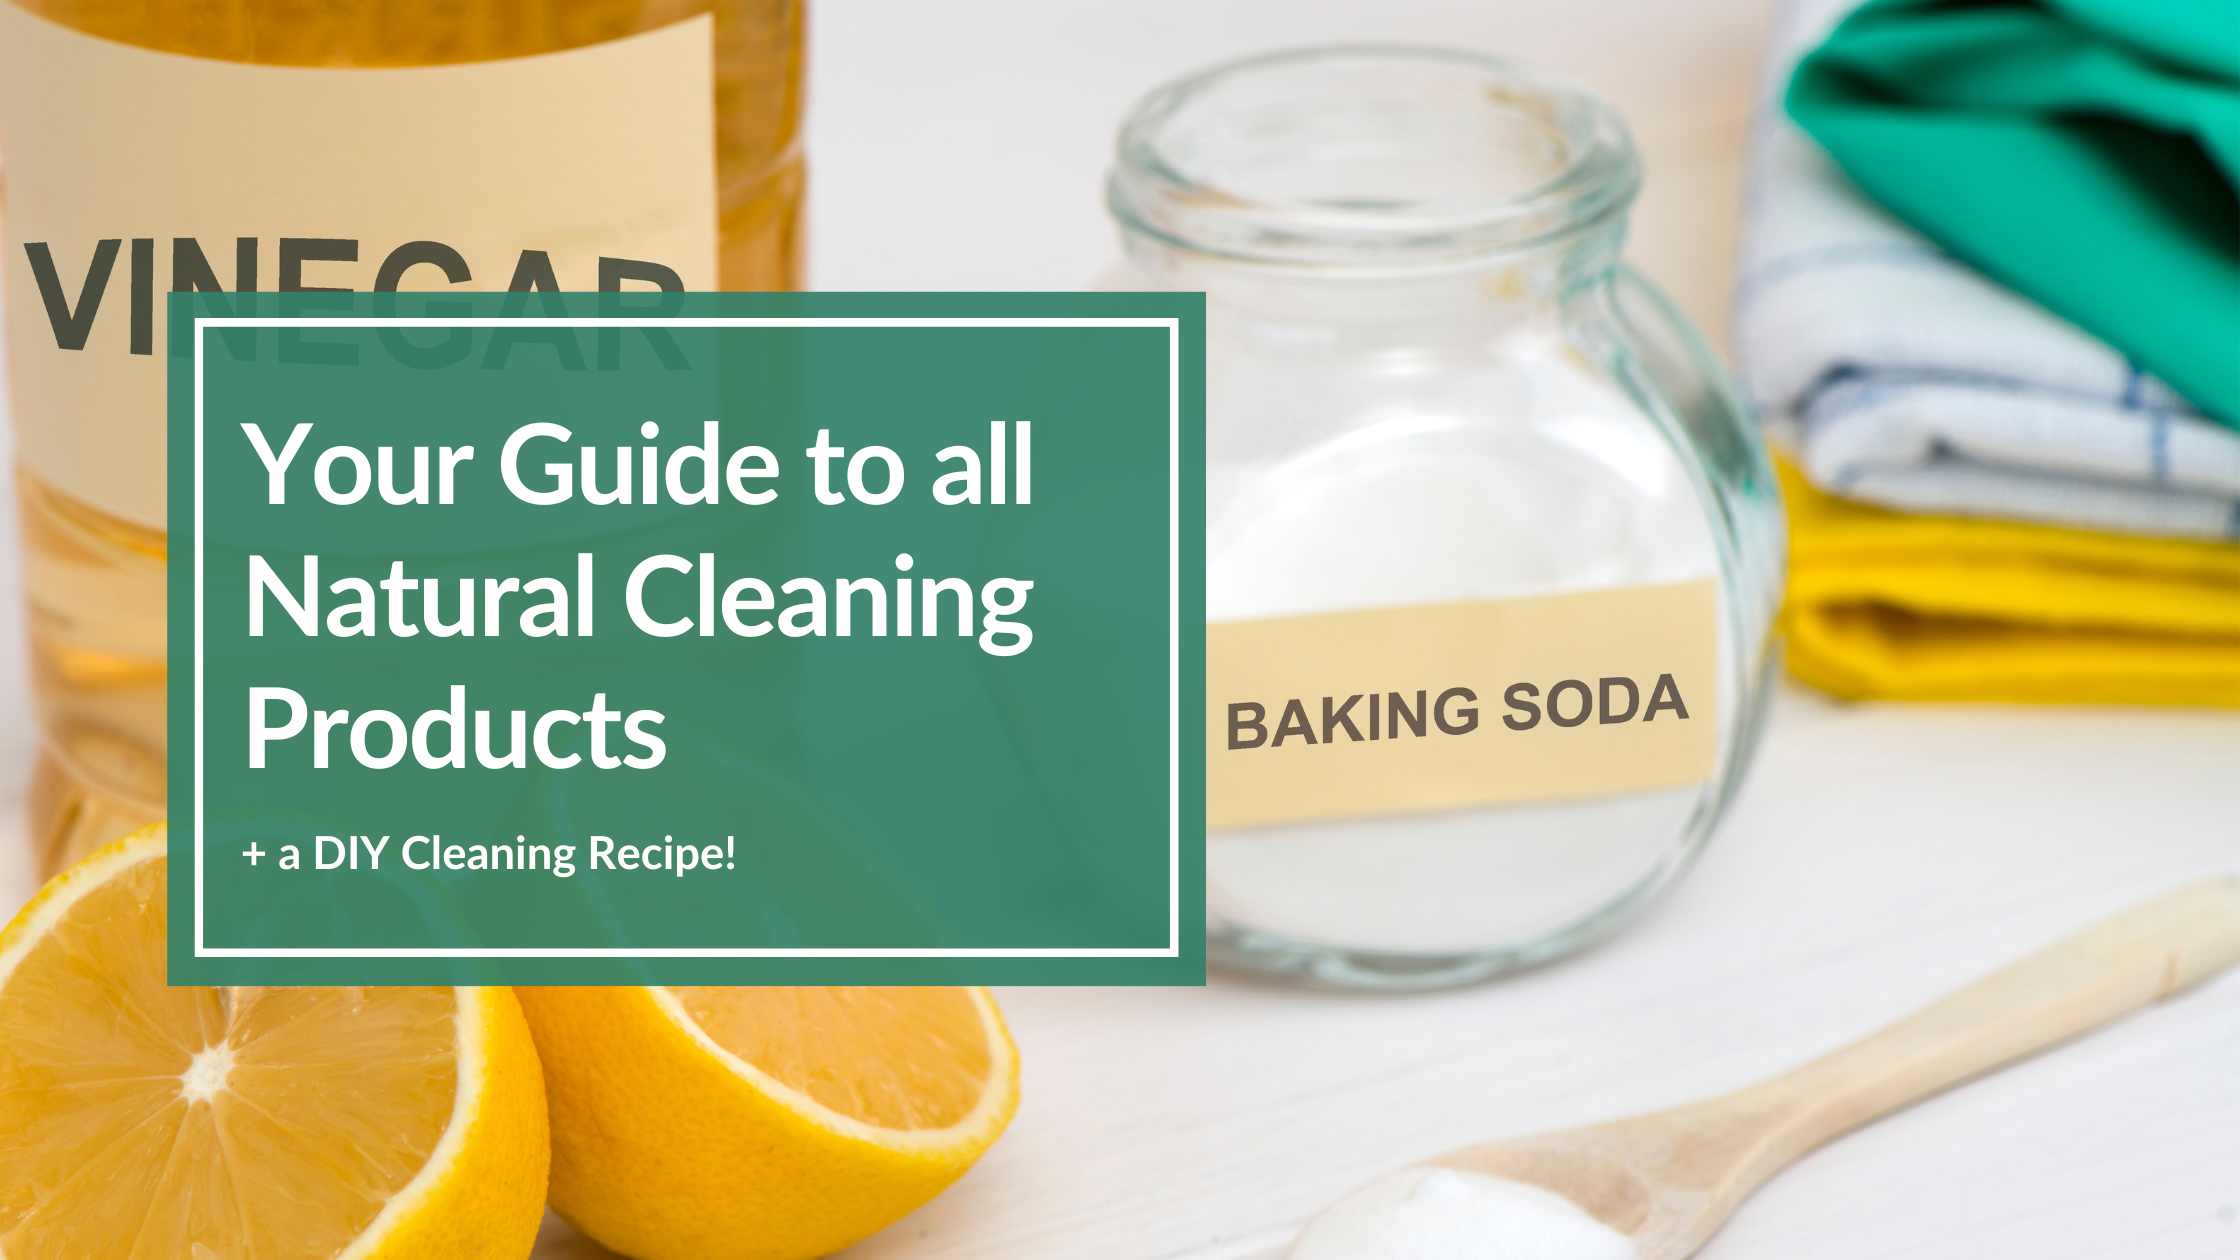 photo of vinegar and baking soda to show ingredients of all natural cleaning products